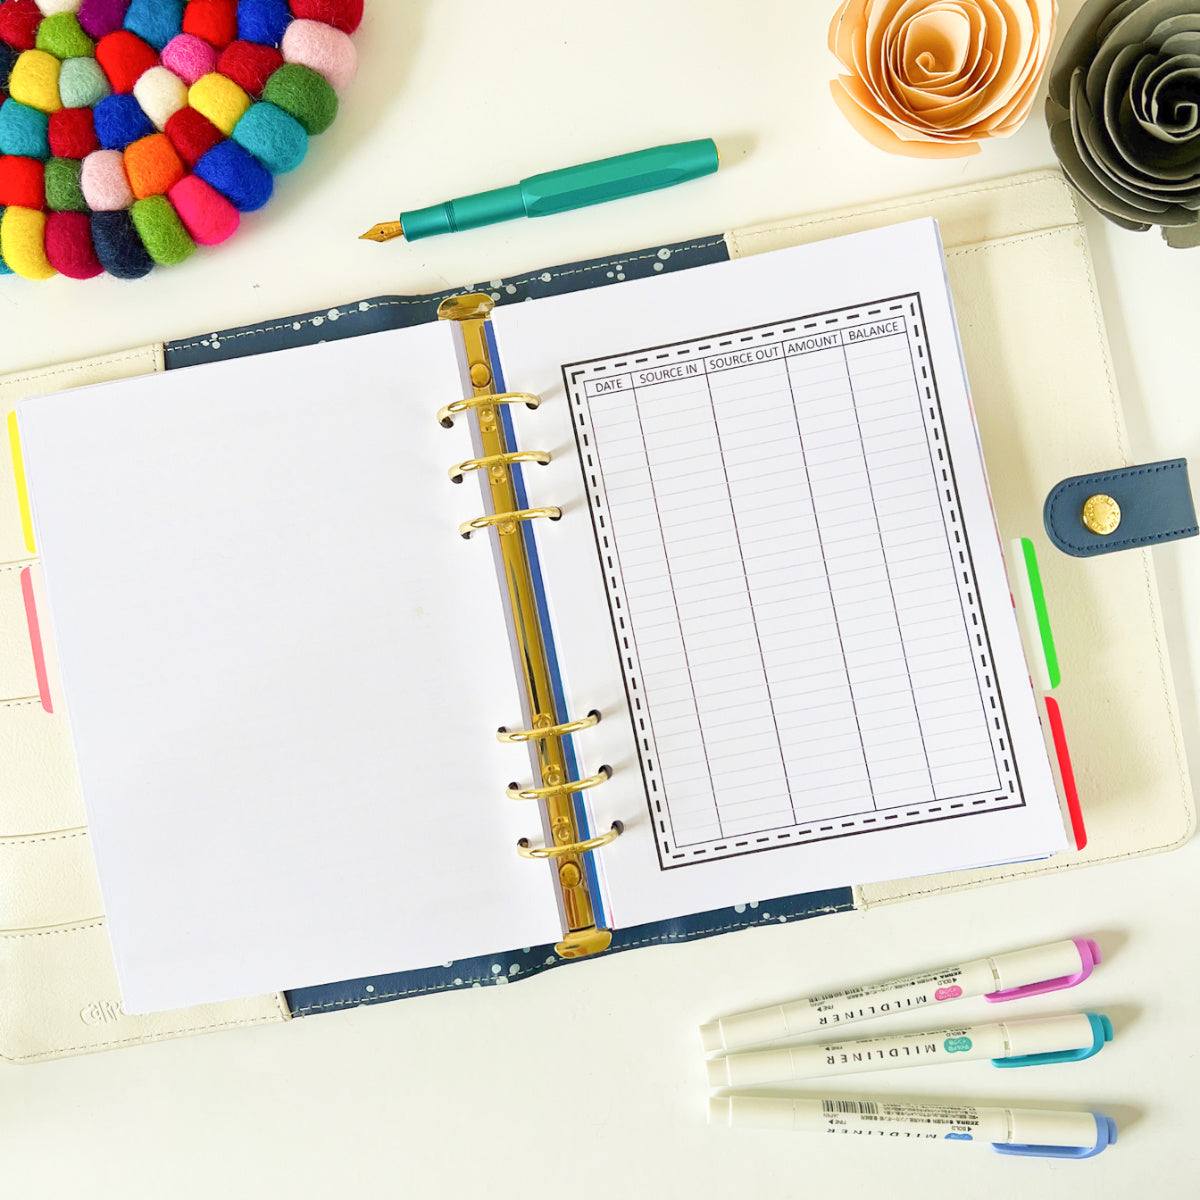 An open Monthly Budget And Spending lies on a desk, containing a handwritten to-do list. Surrounding the planner are three pens, a colorful pom-pom coaster, a rose-shaped gray decoration, and a cup of coffee. The planner pages are secured with gold rings.